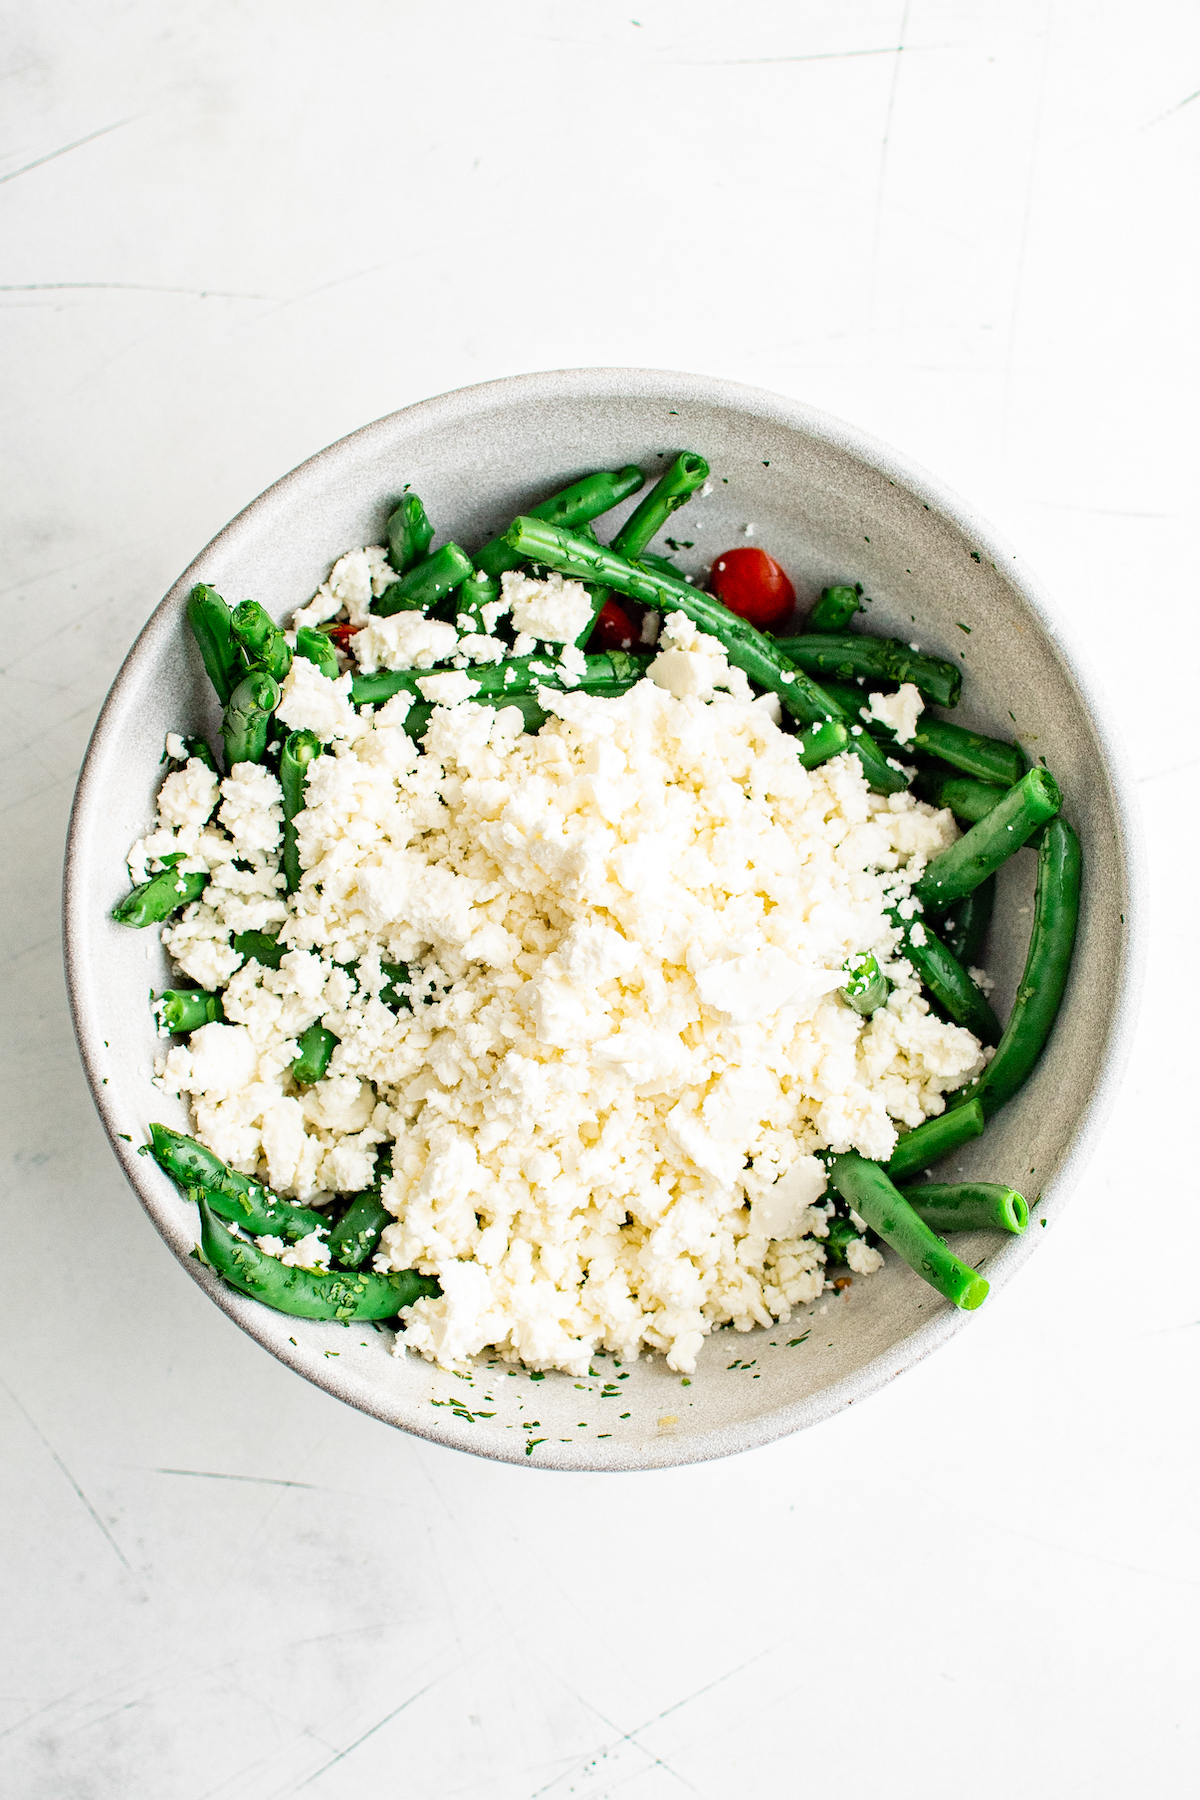 green beans in a bowl topped with a large scoop of feta cheese